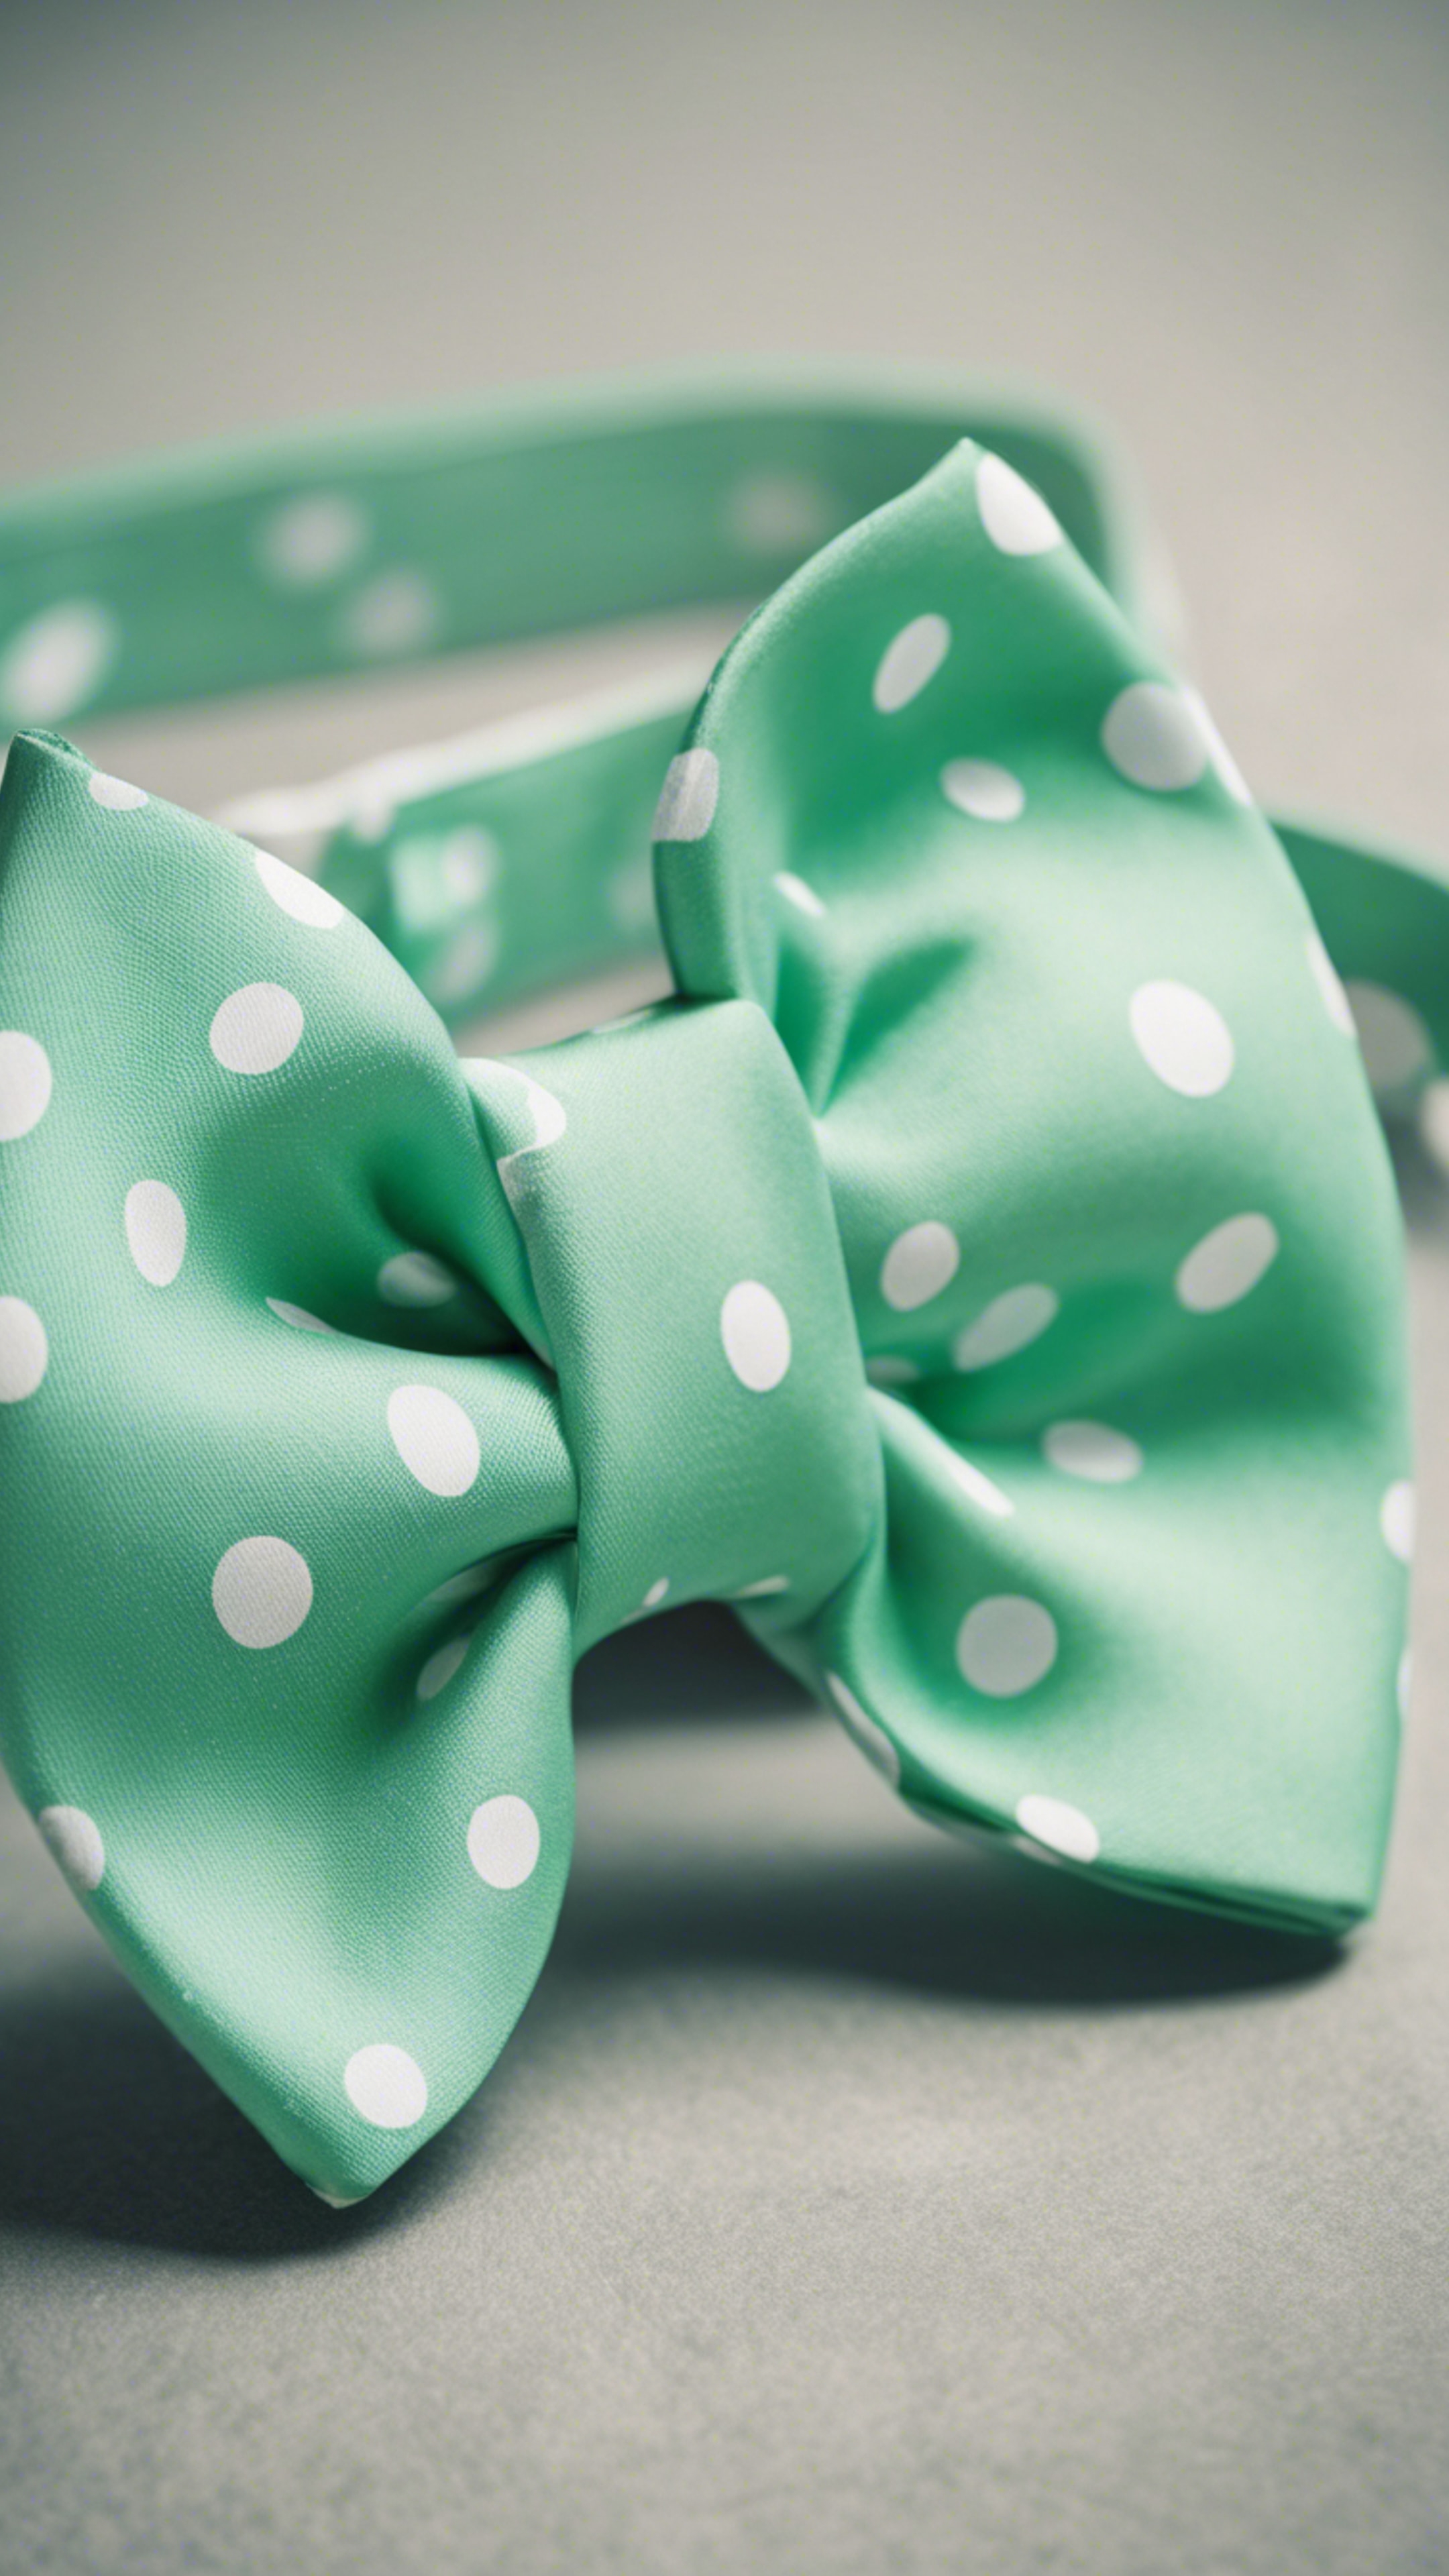 A detailed close-up of a mint green preppy bow tie with white dots.壁紙[42f277cb9da742c3b823]